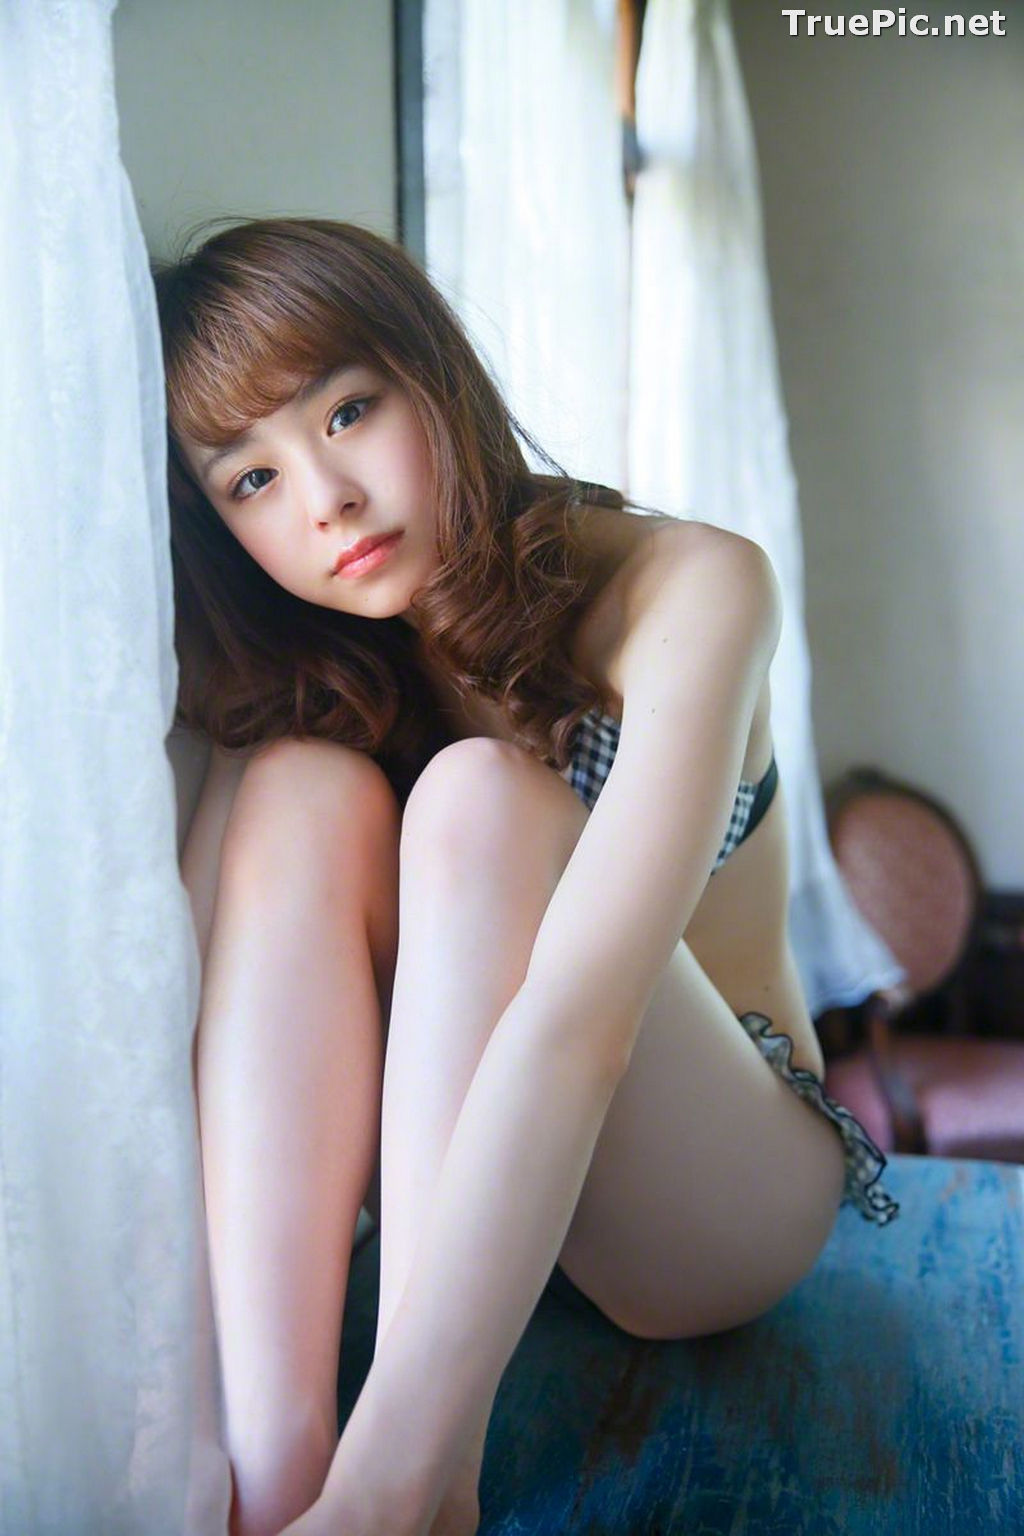 Image Wanibooks No.139-140 - Japanese Voice Actress and Singer - Rena Sato - TruePic.net - Picture-102